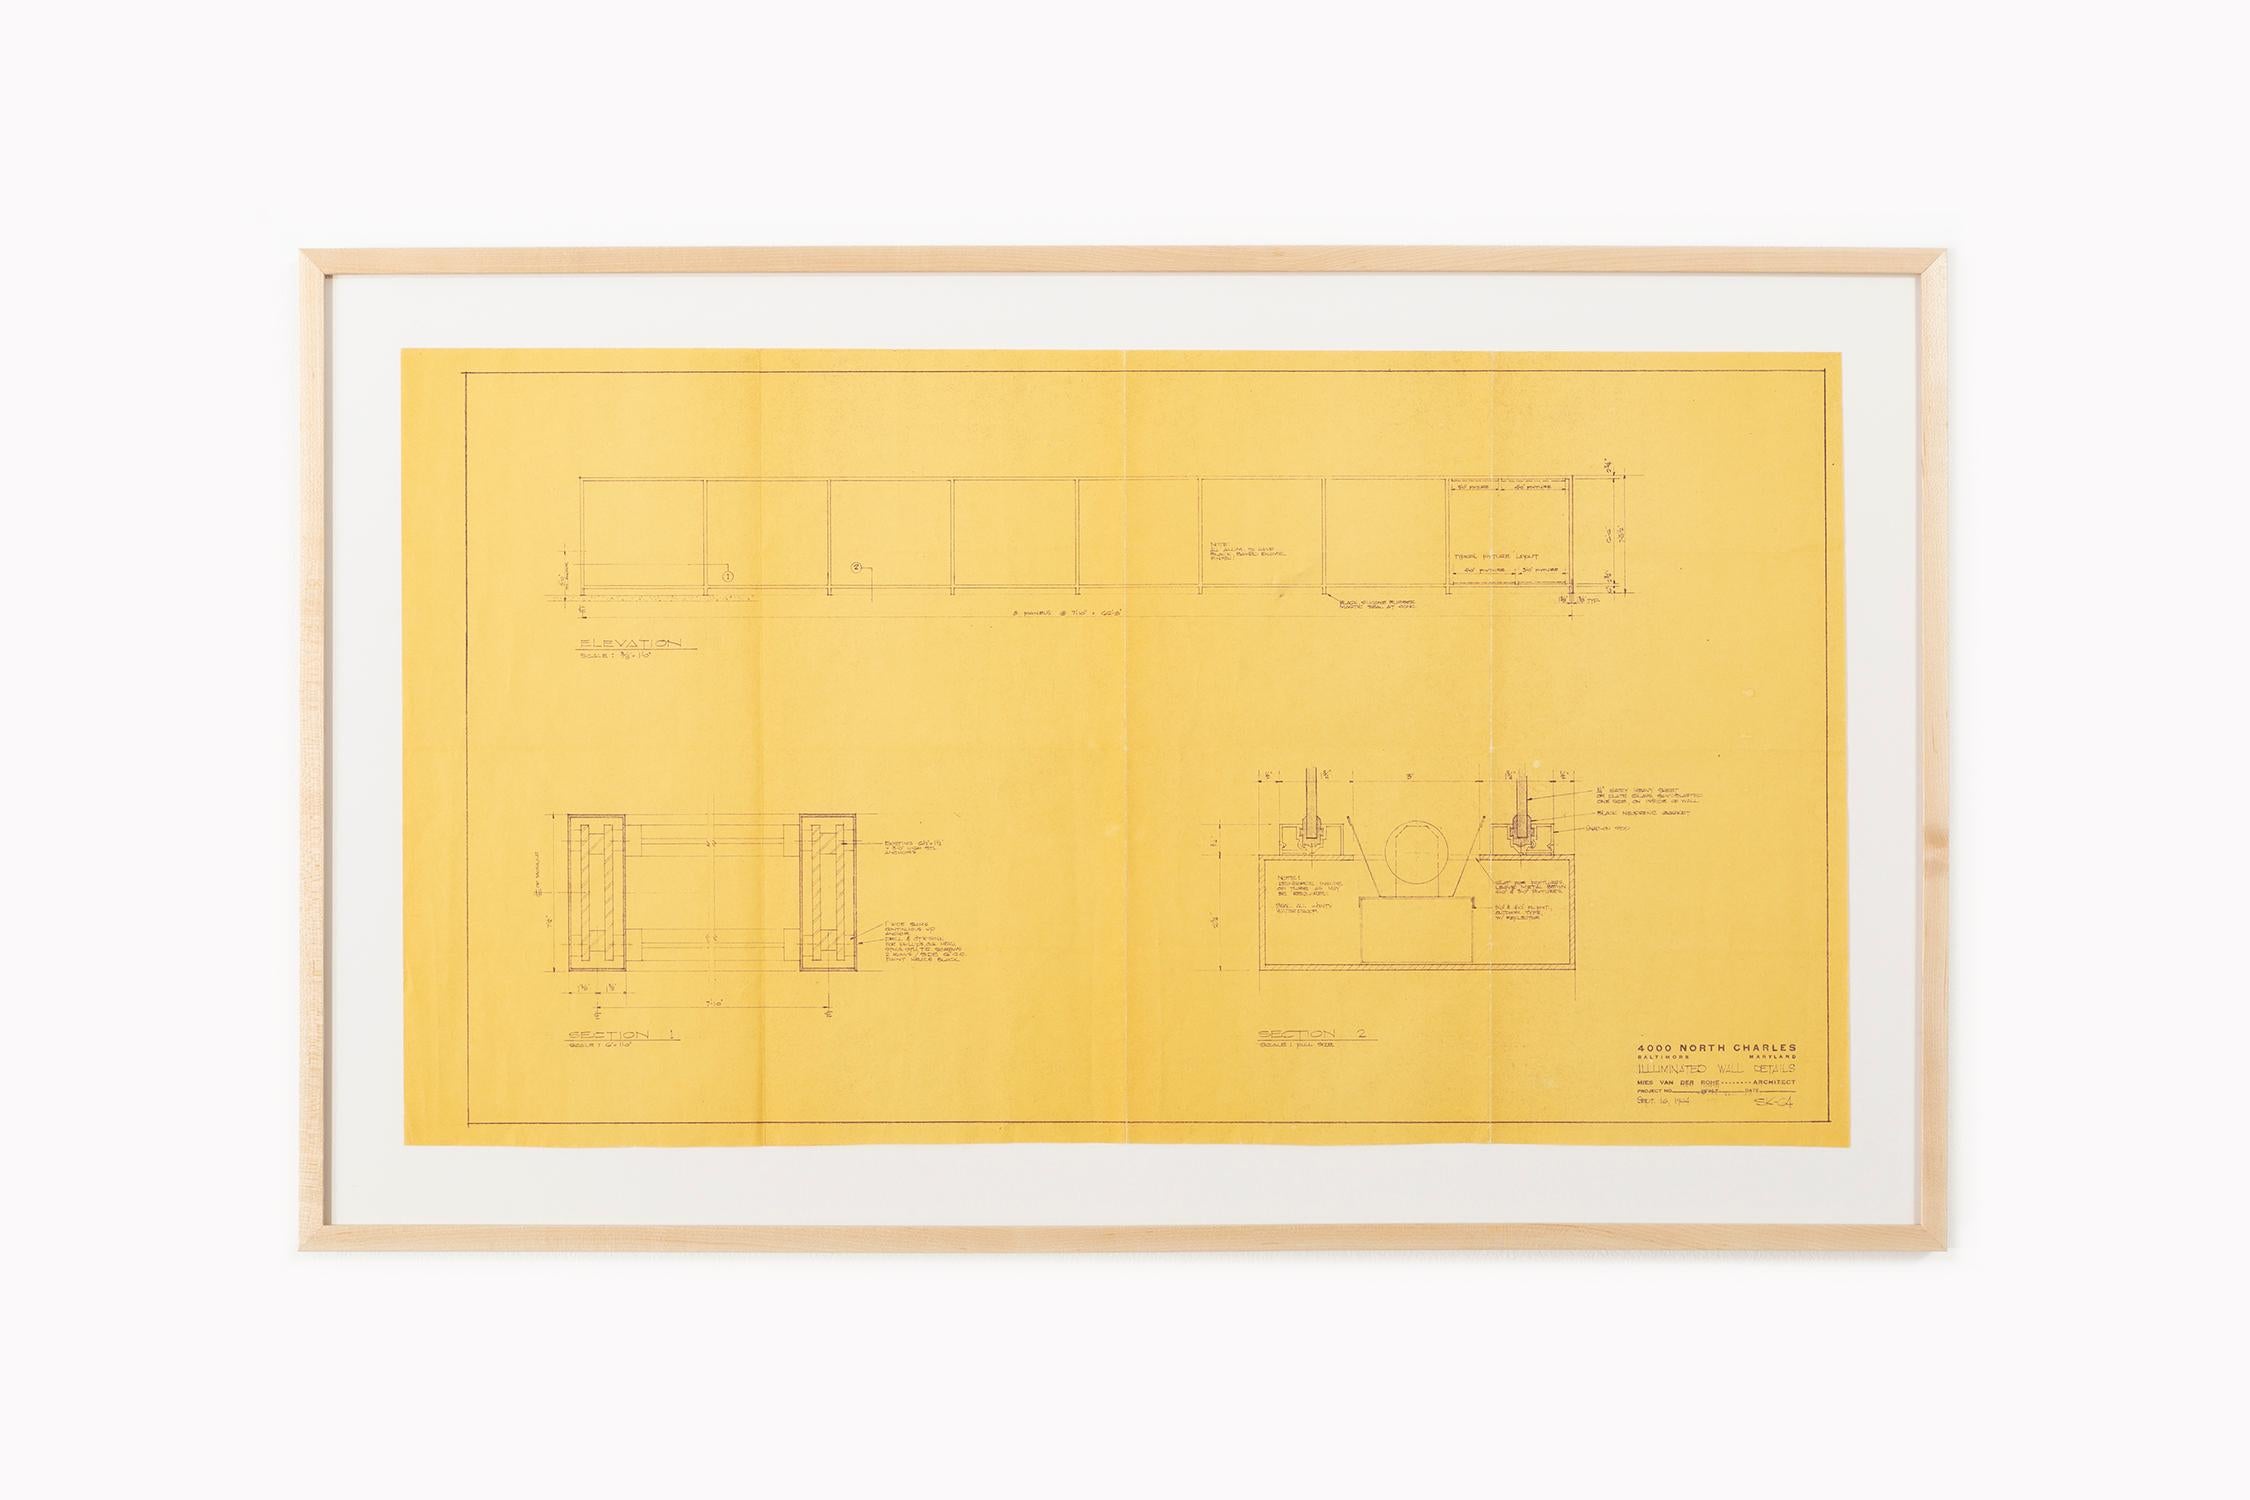 Mid-20th Century Mies van der Rohe Blueprint, One Charles Center, Baltimore 1961, Elevations  For Sale